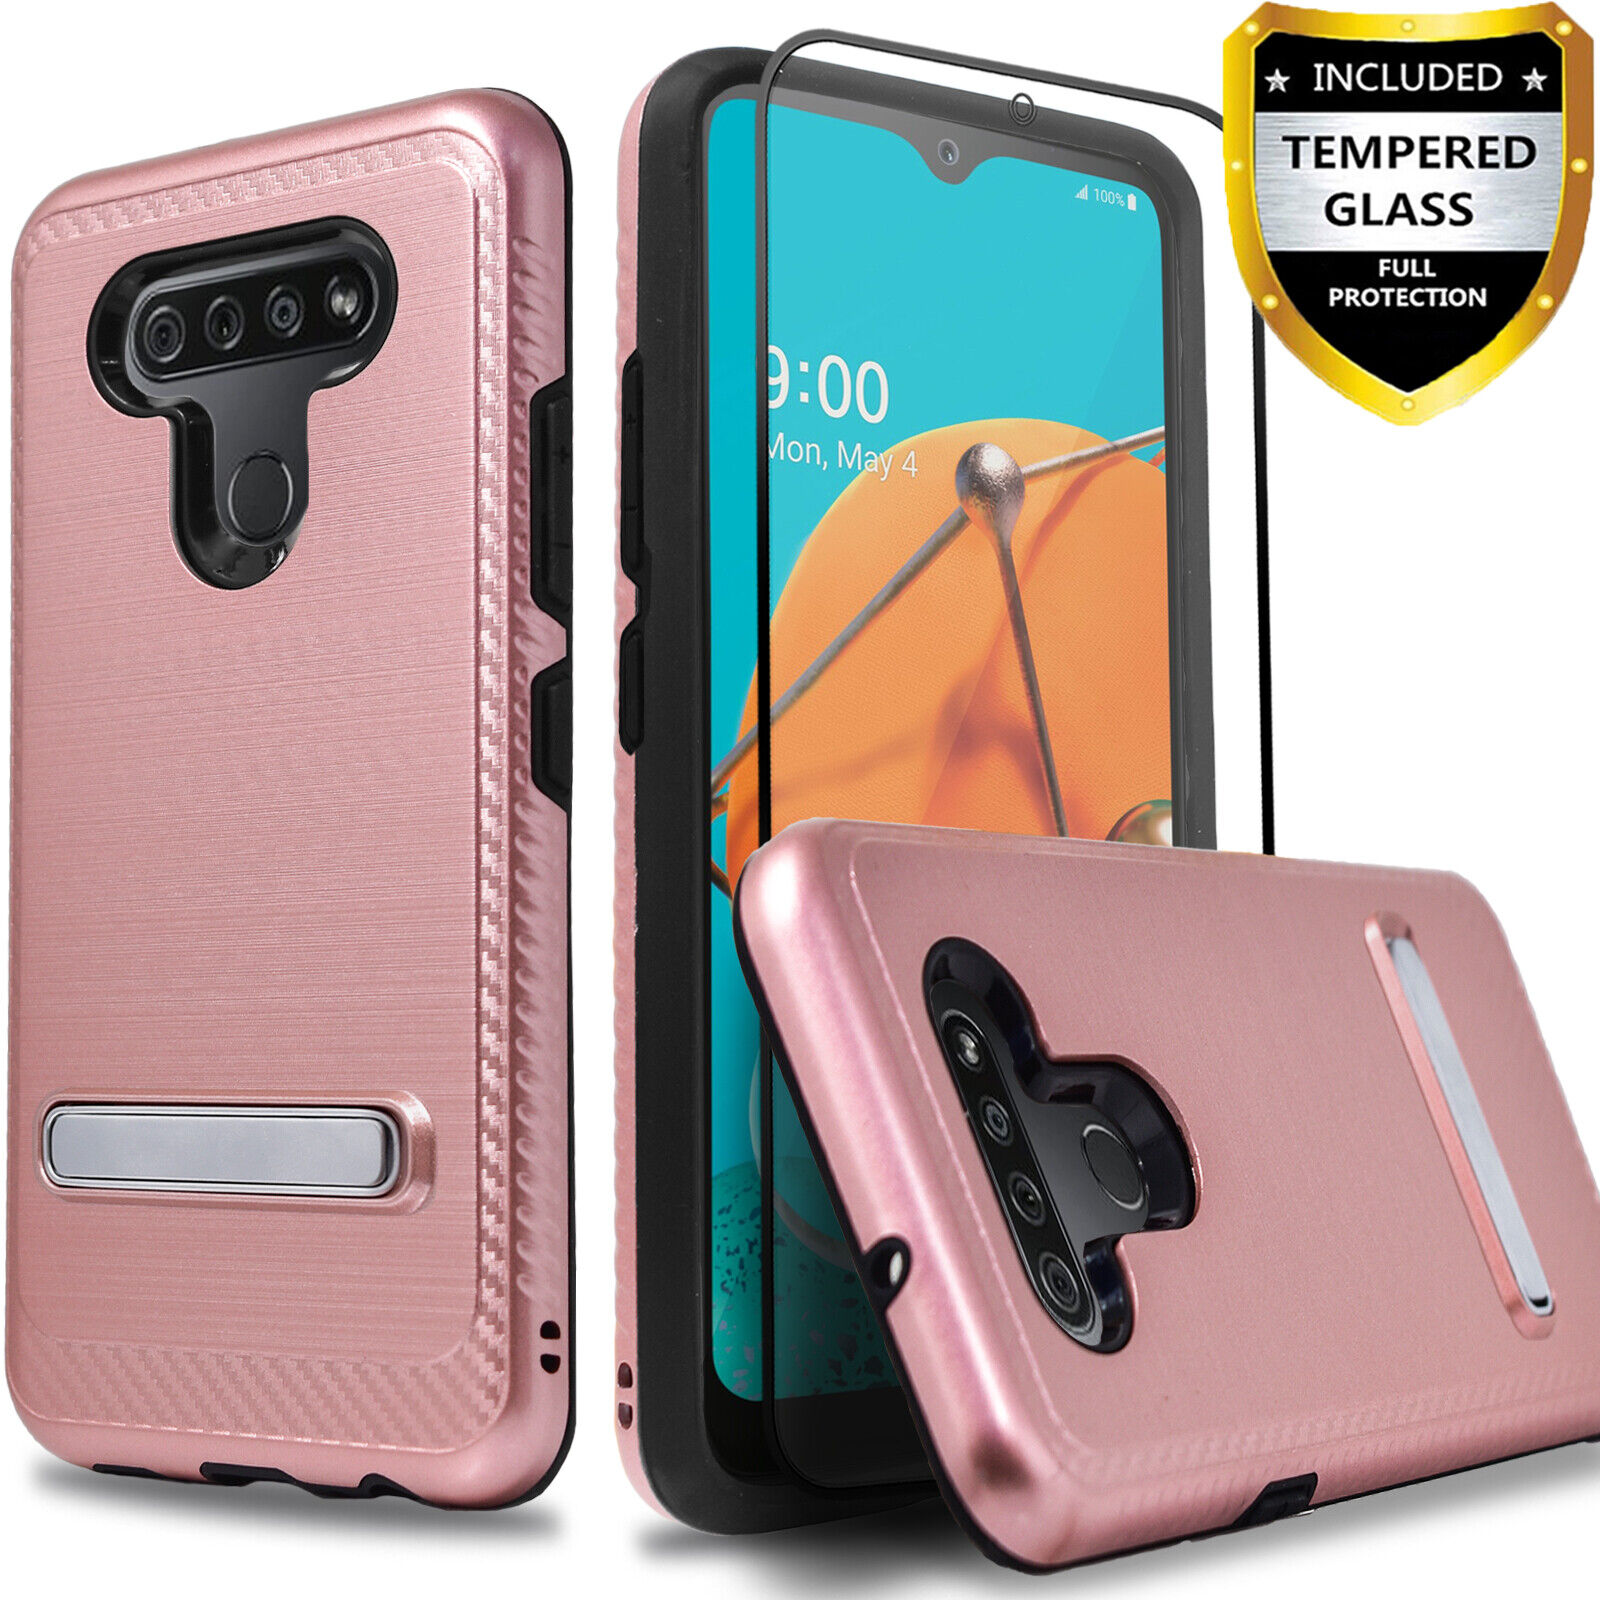 For LG K51 / Reflect L555DL Case Built Kickstand Cover +Tempered Glass Protector